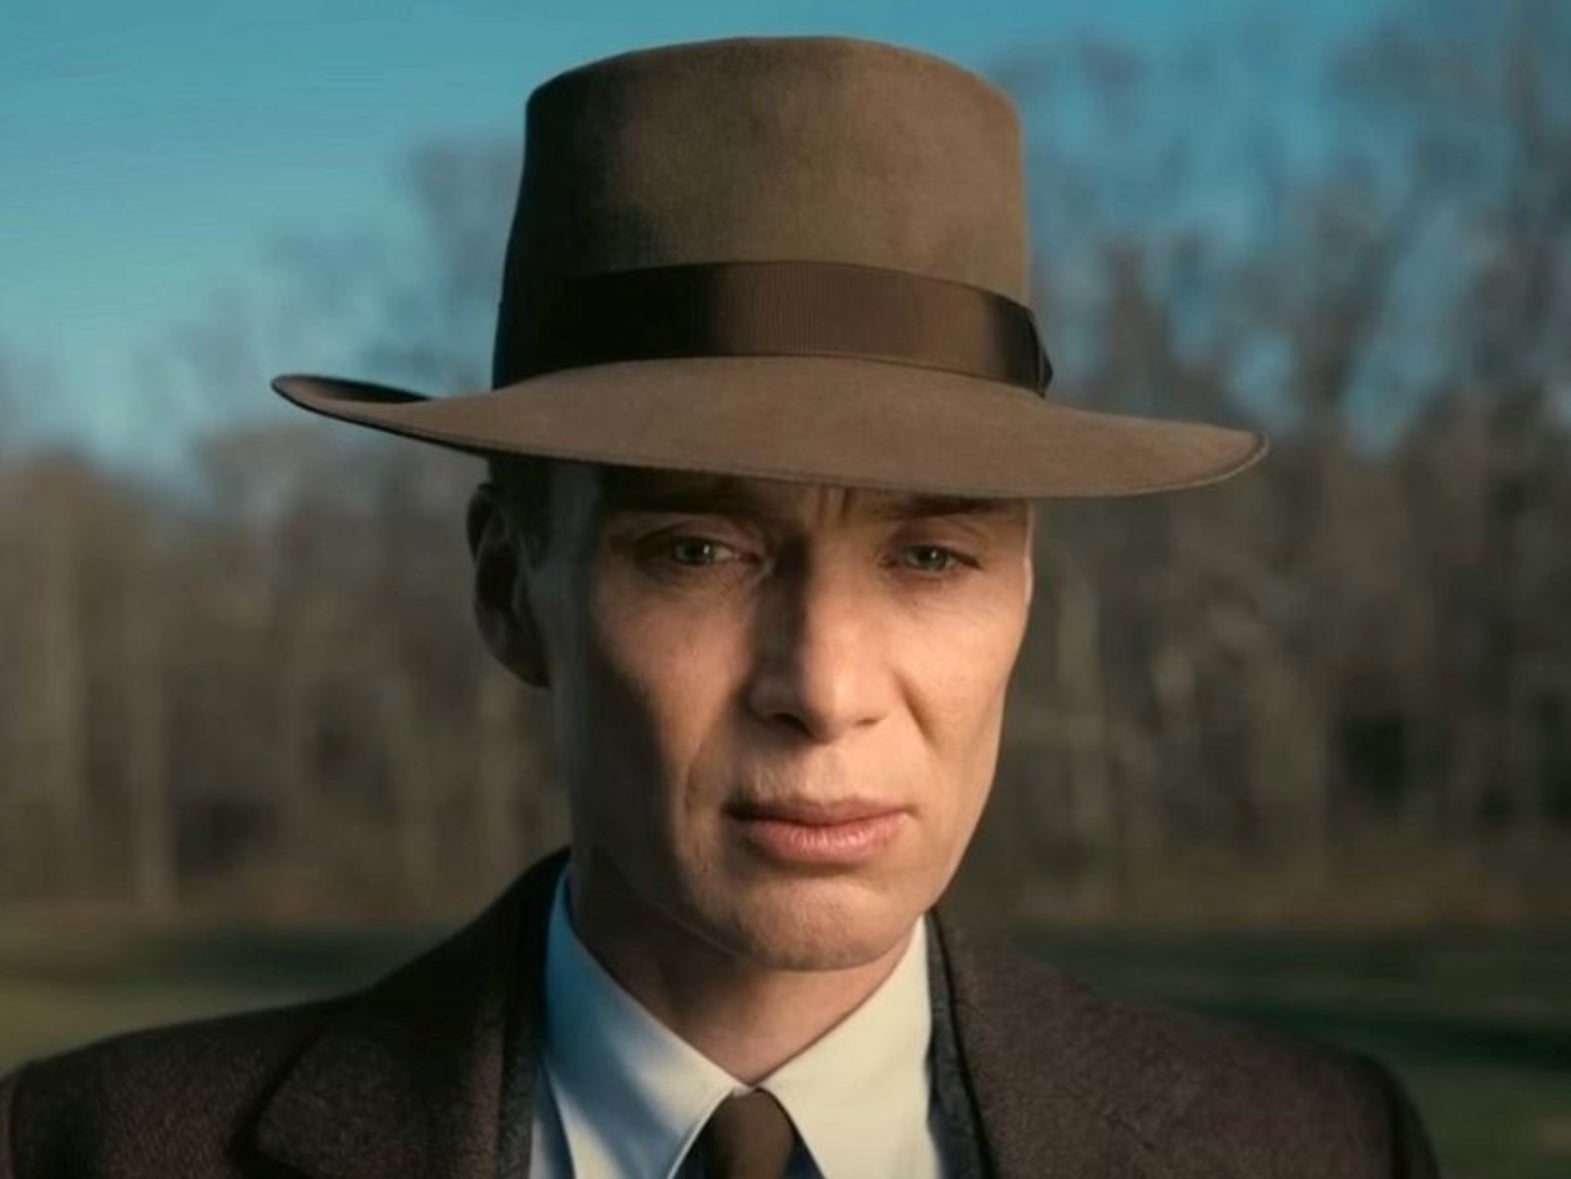 ‘Oppenheimer’ has been nominated for 13 Oscars